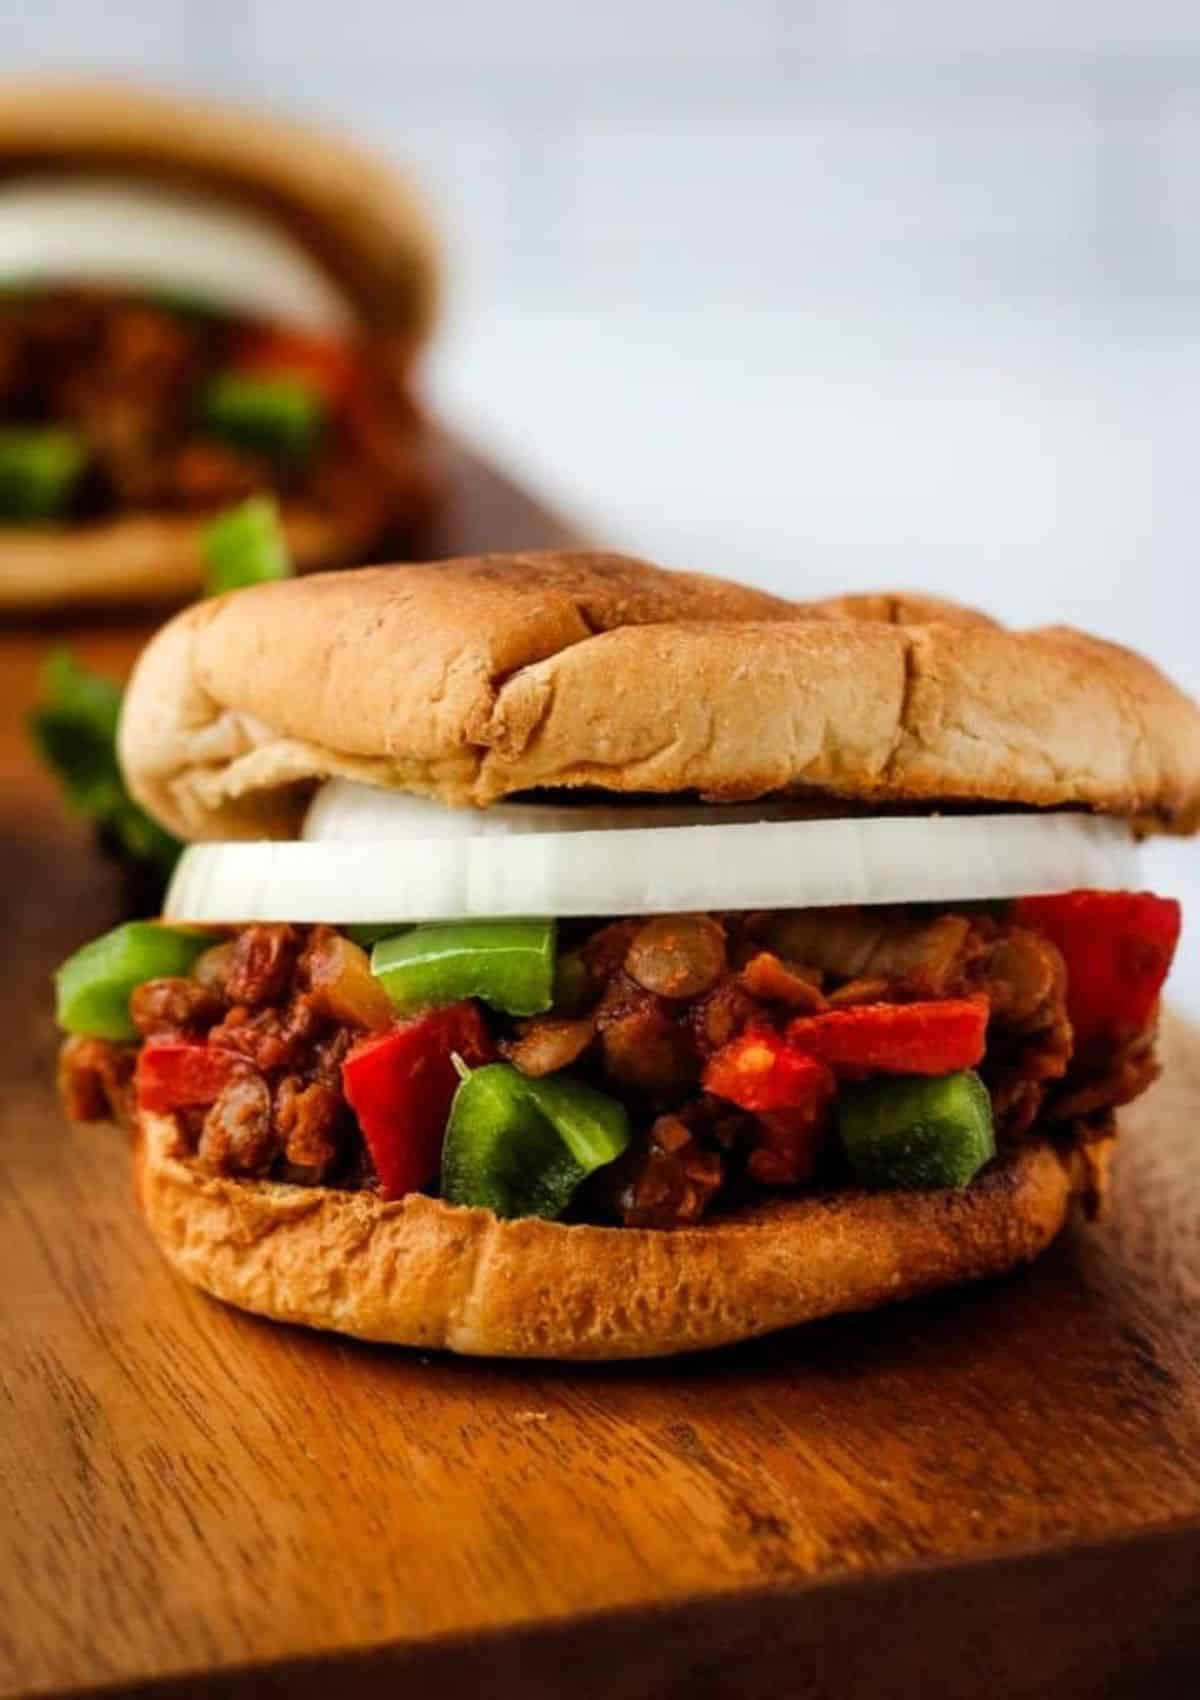 Close-up of a vegan sloppy Joe with onion sandwich sitting on wood table.